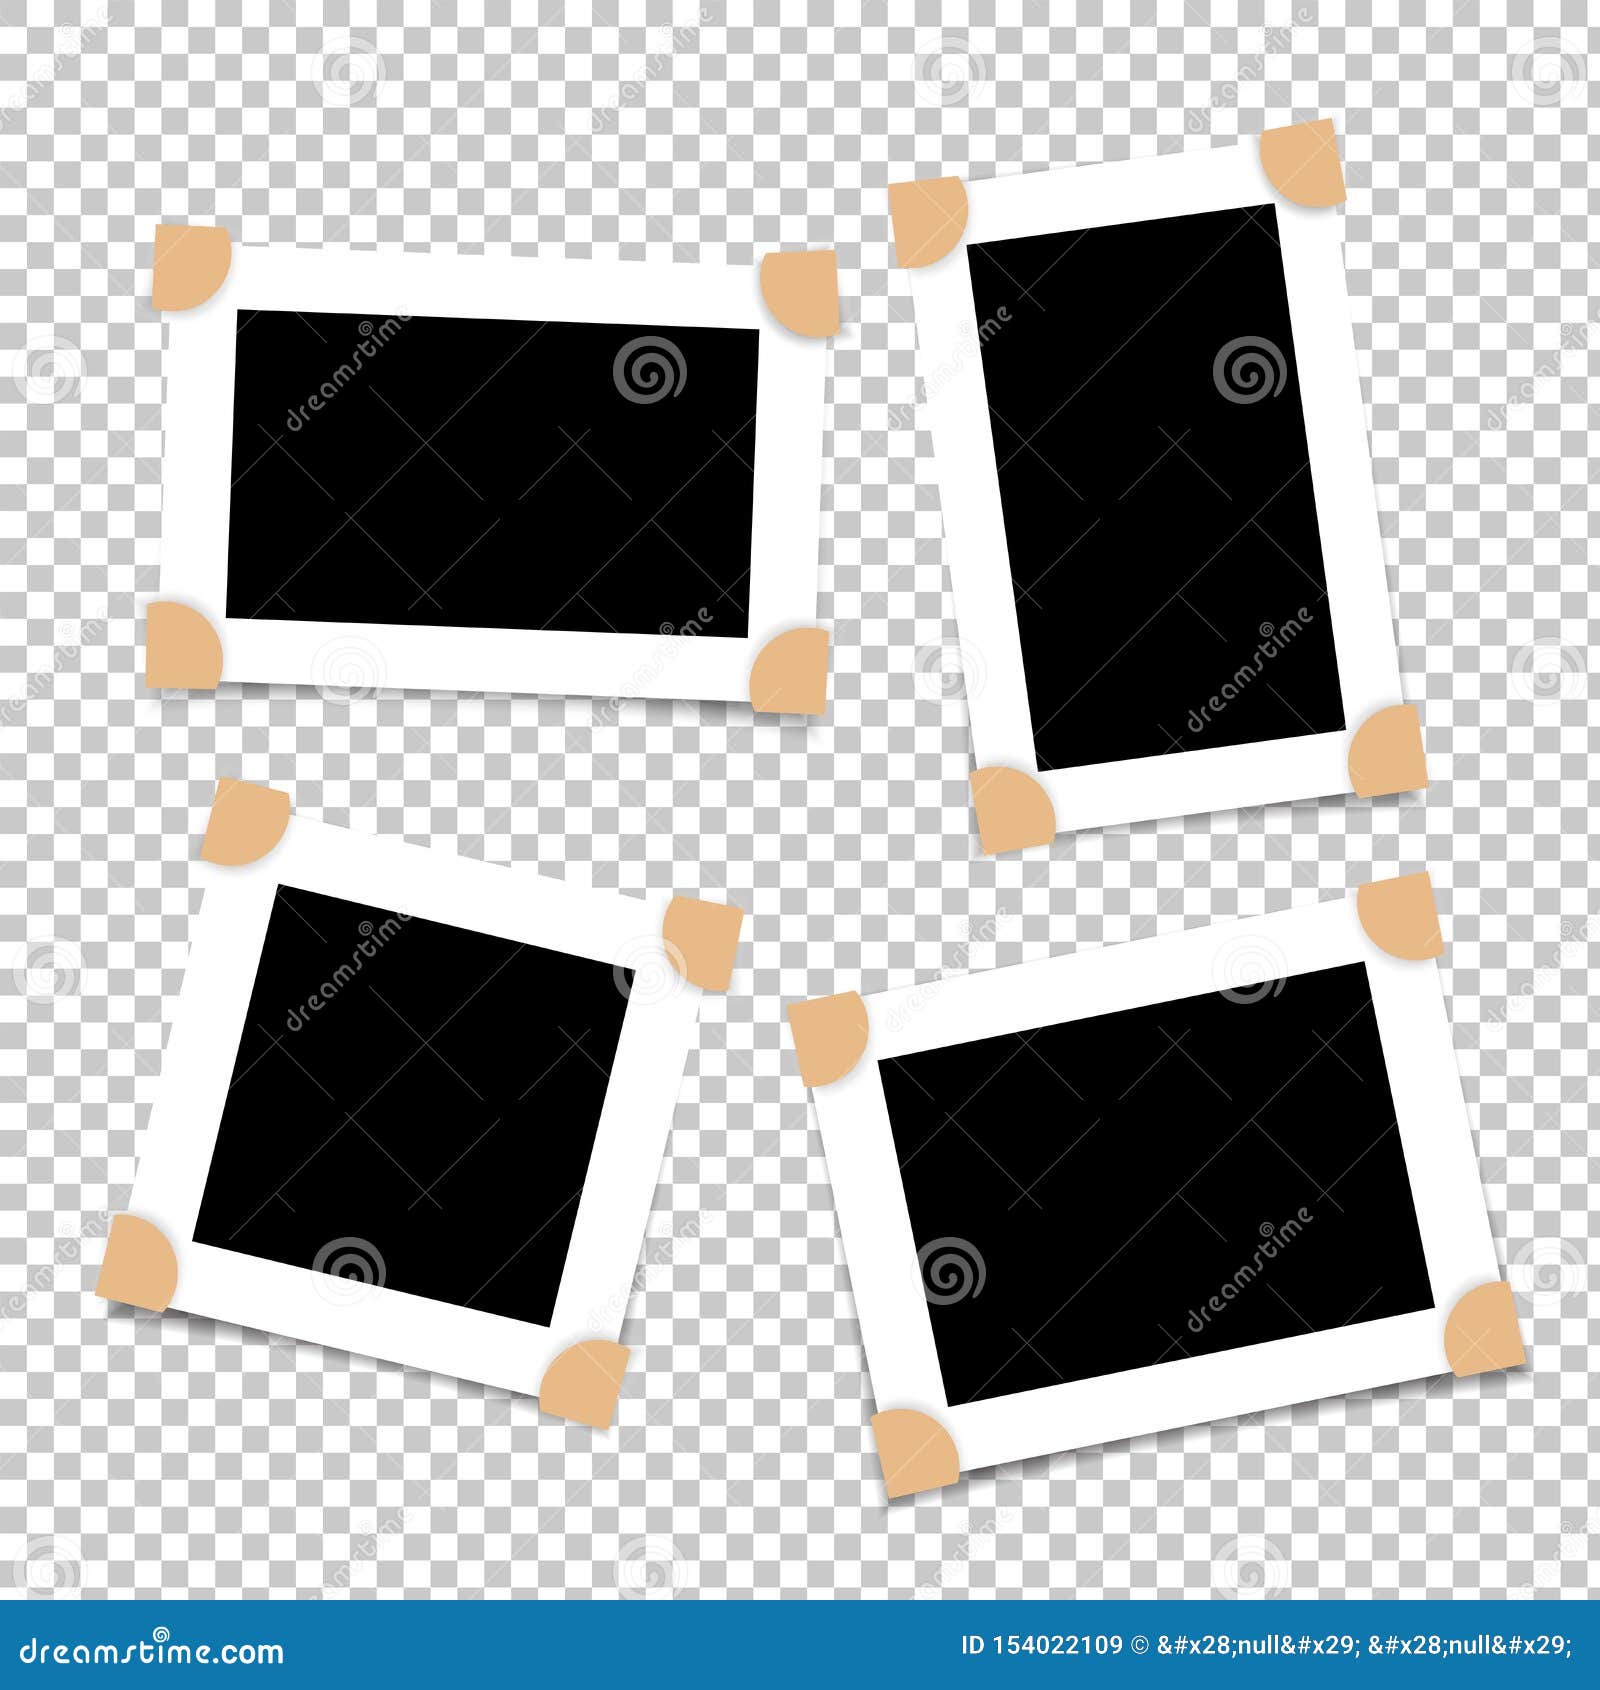 Adhesive Tape Frame Free Stock Photo - Public Domain Pictures